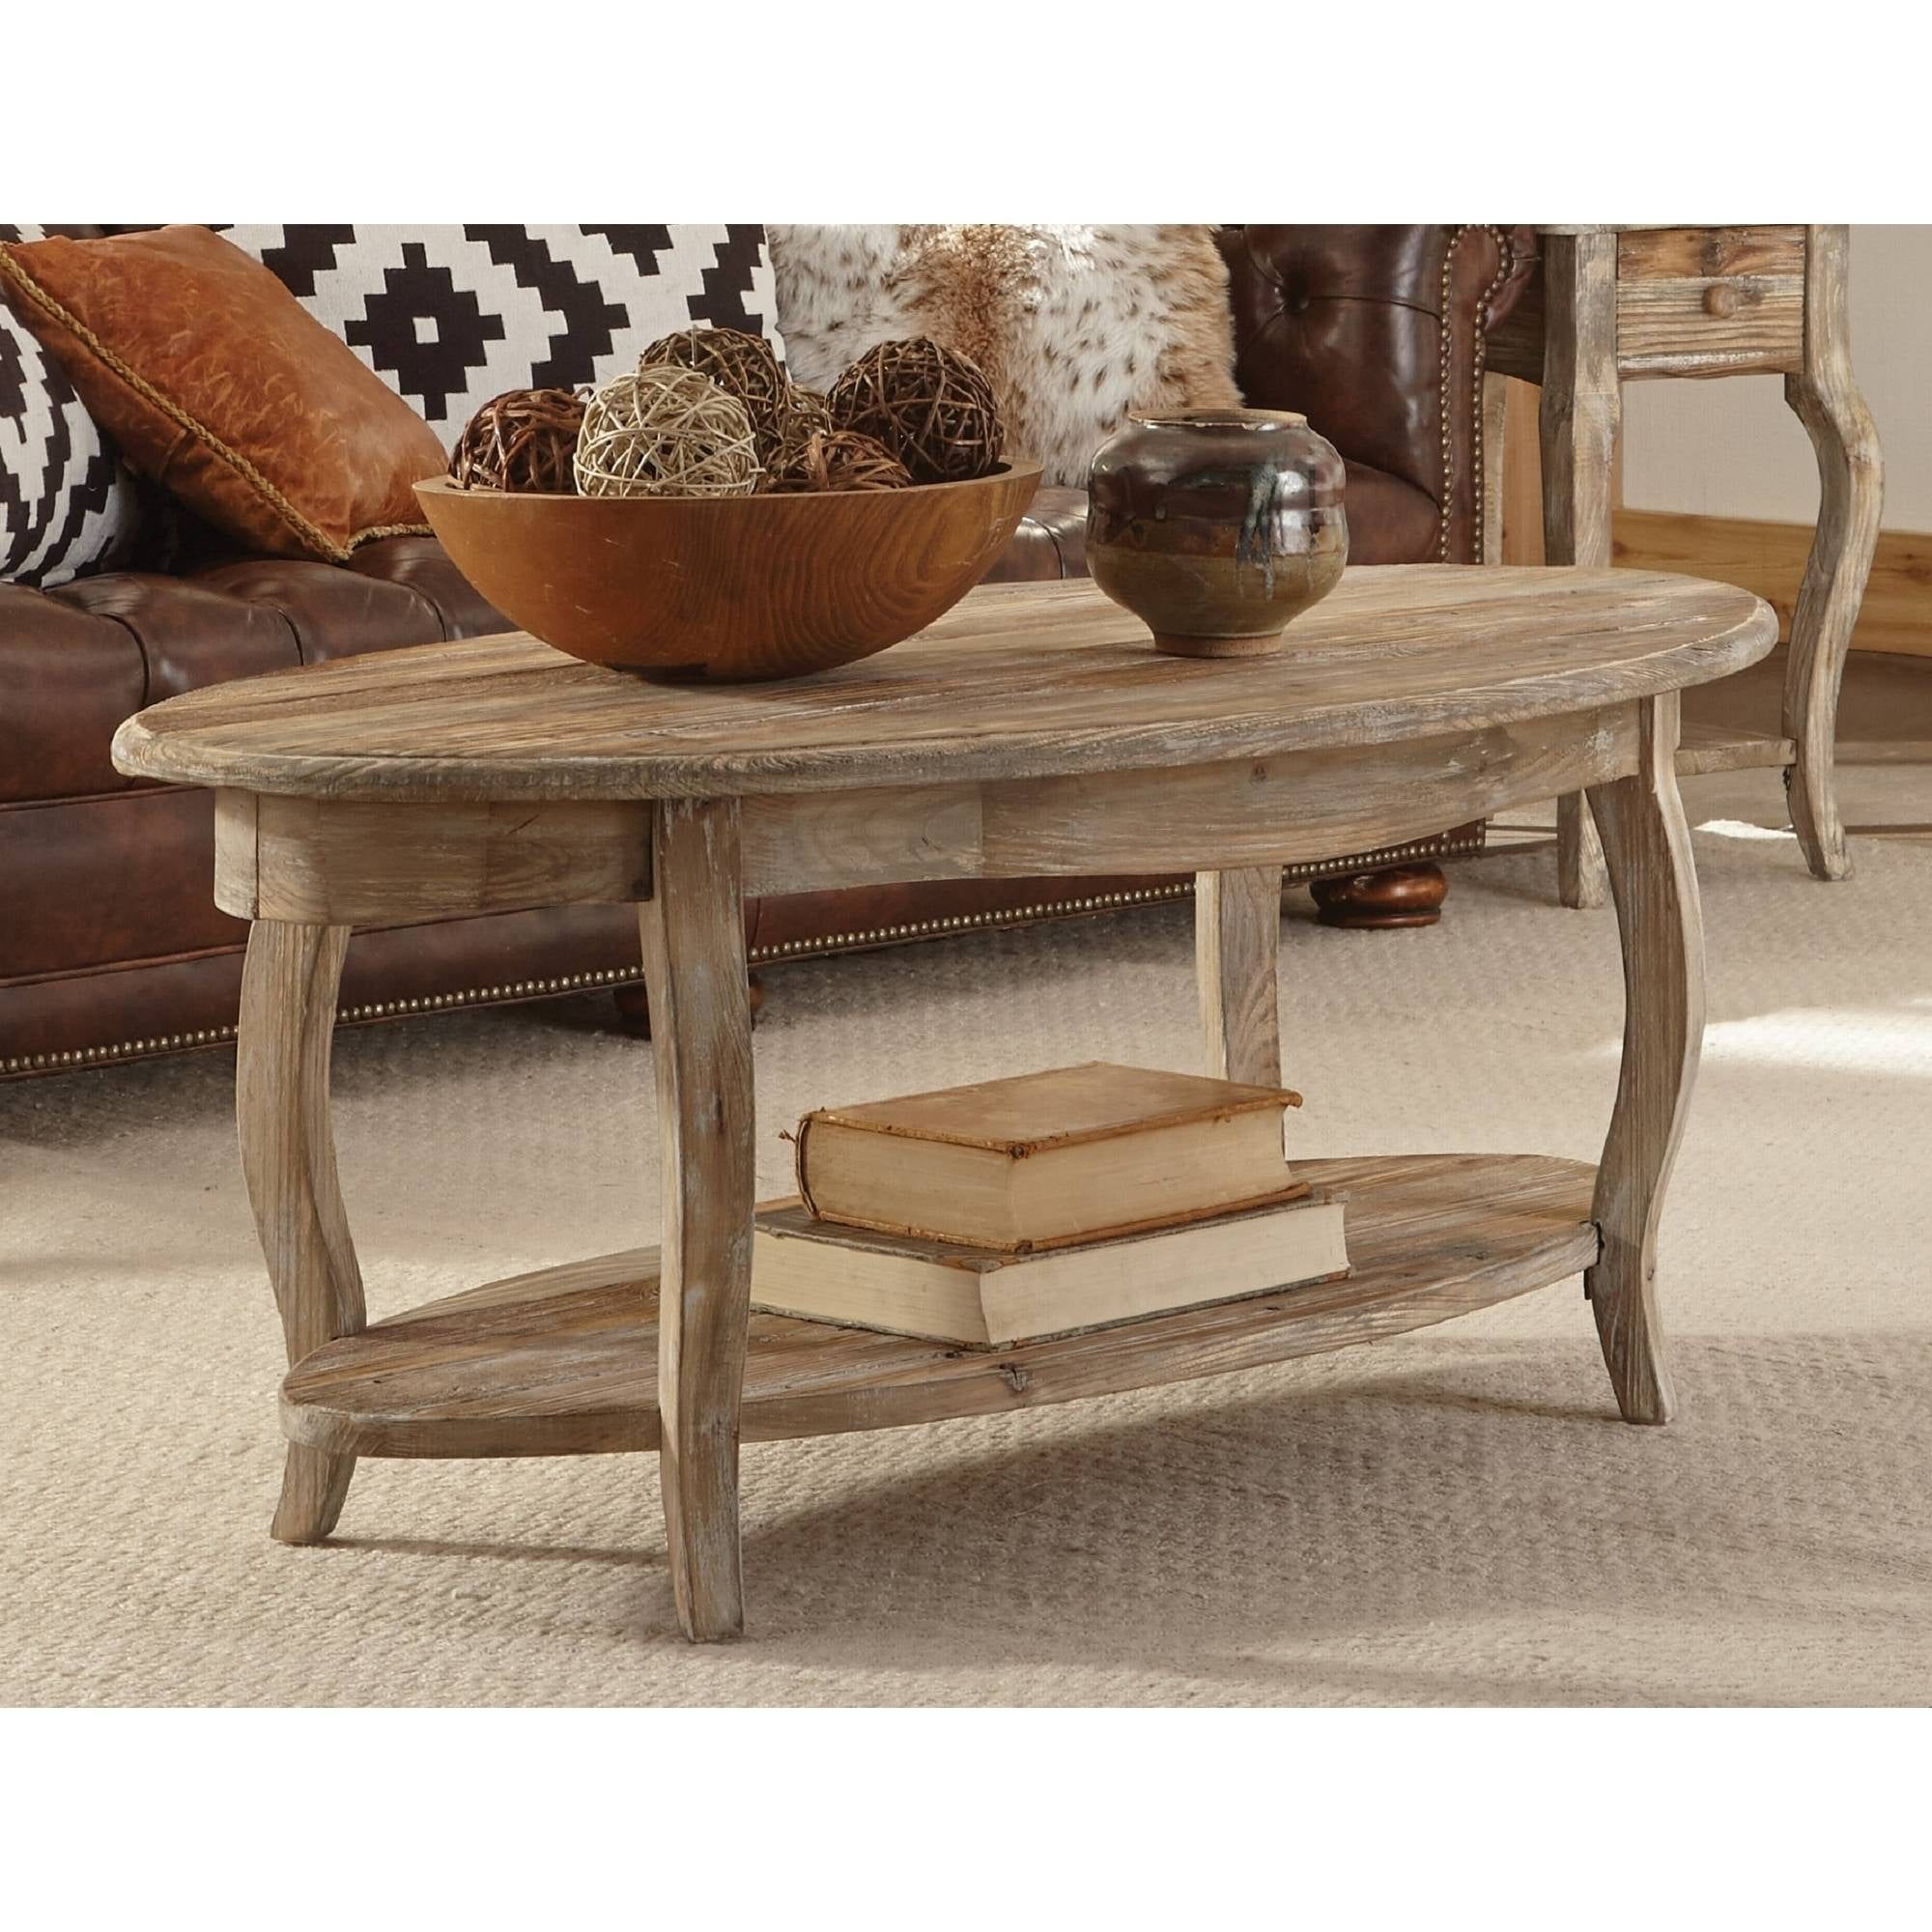 Alaterre Rustic Reclaimed Oval Coffee Table, Driftwood – Walmart For Rustic Coffee Tables (Gallery 9 of 20)